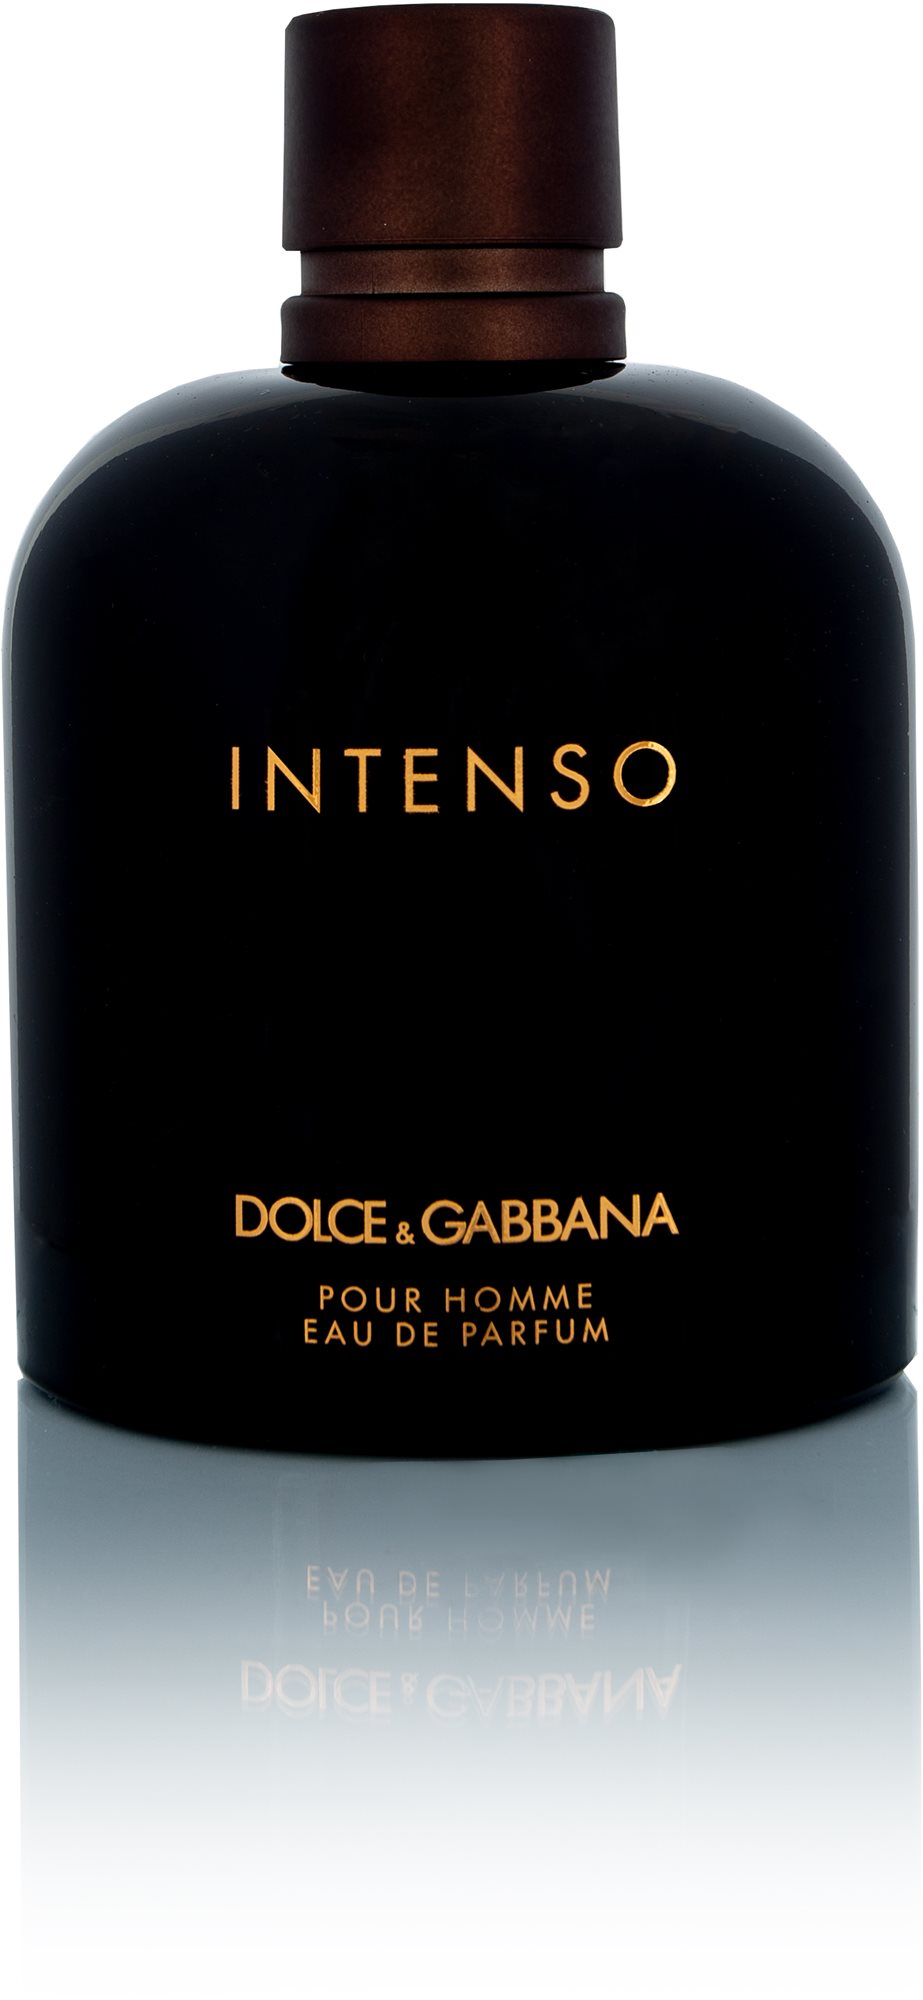 DOLCE & GABBANA Pour Homme Intenso EdP